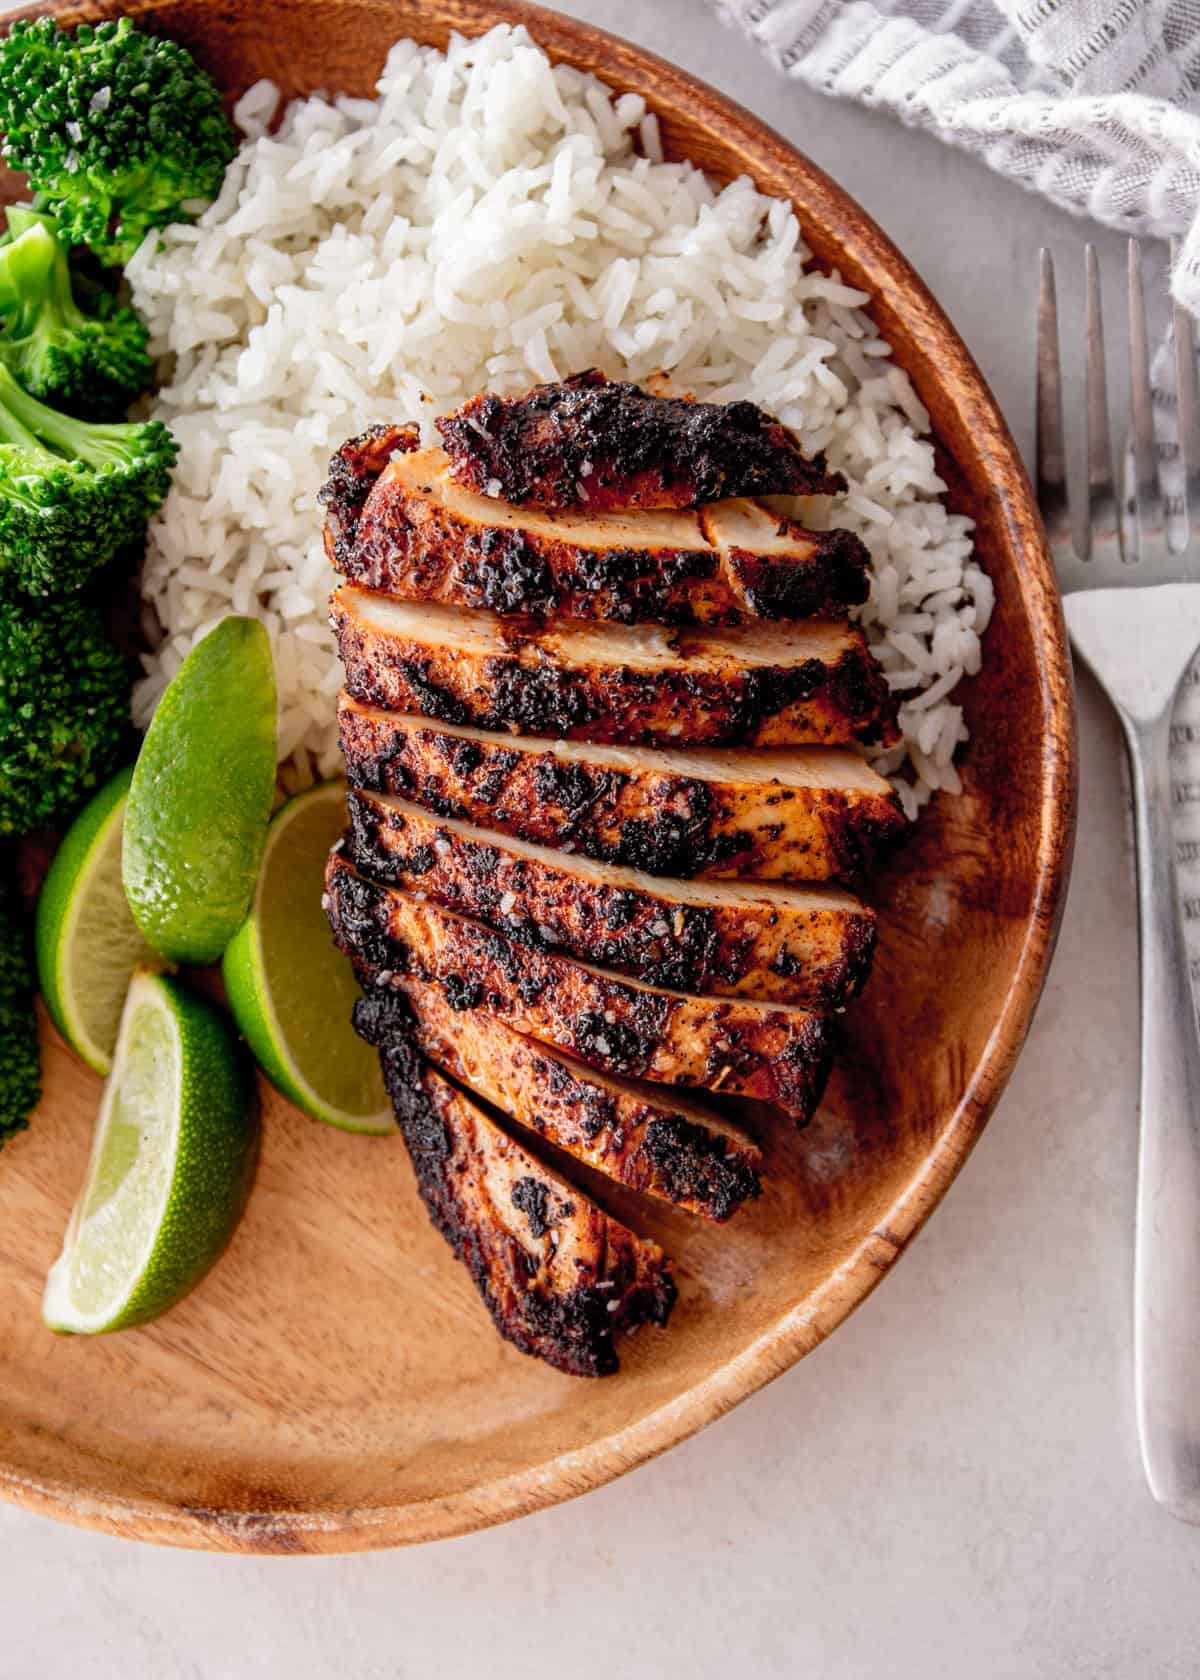 chicken, rice and broccoli on a wooden plate